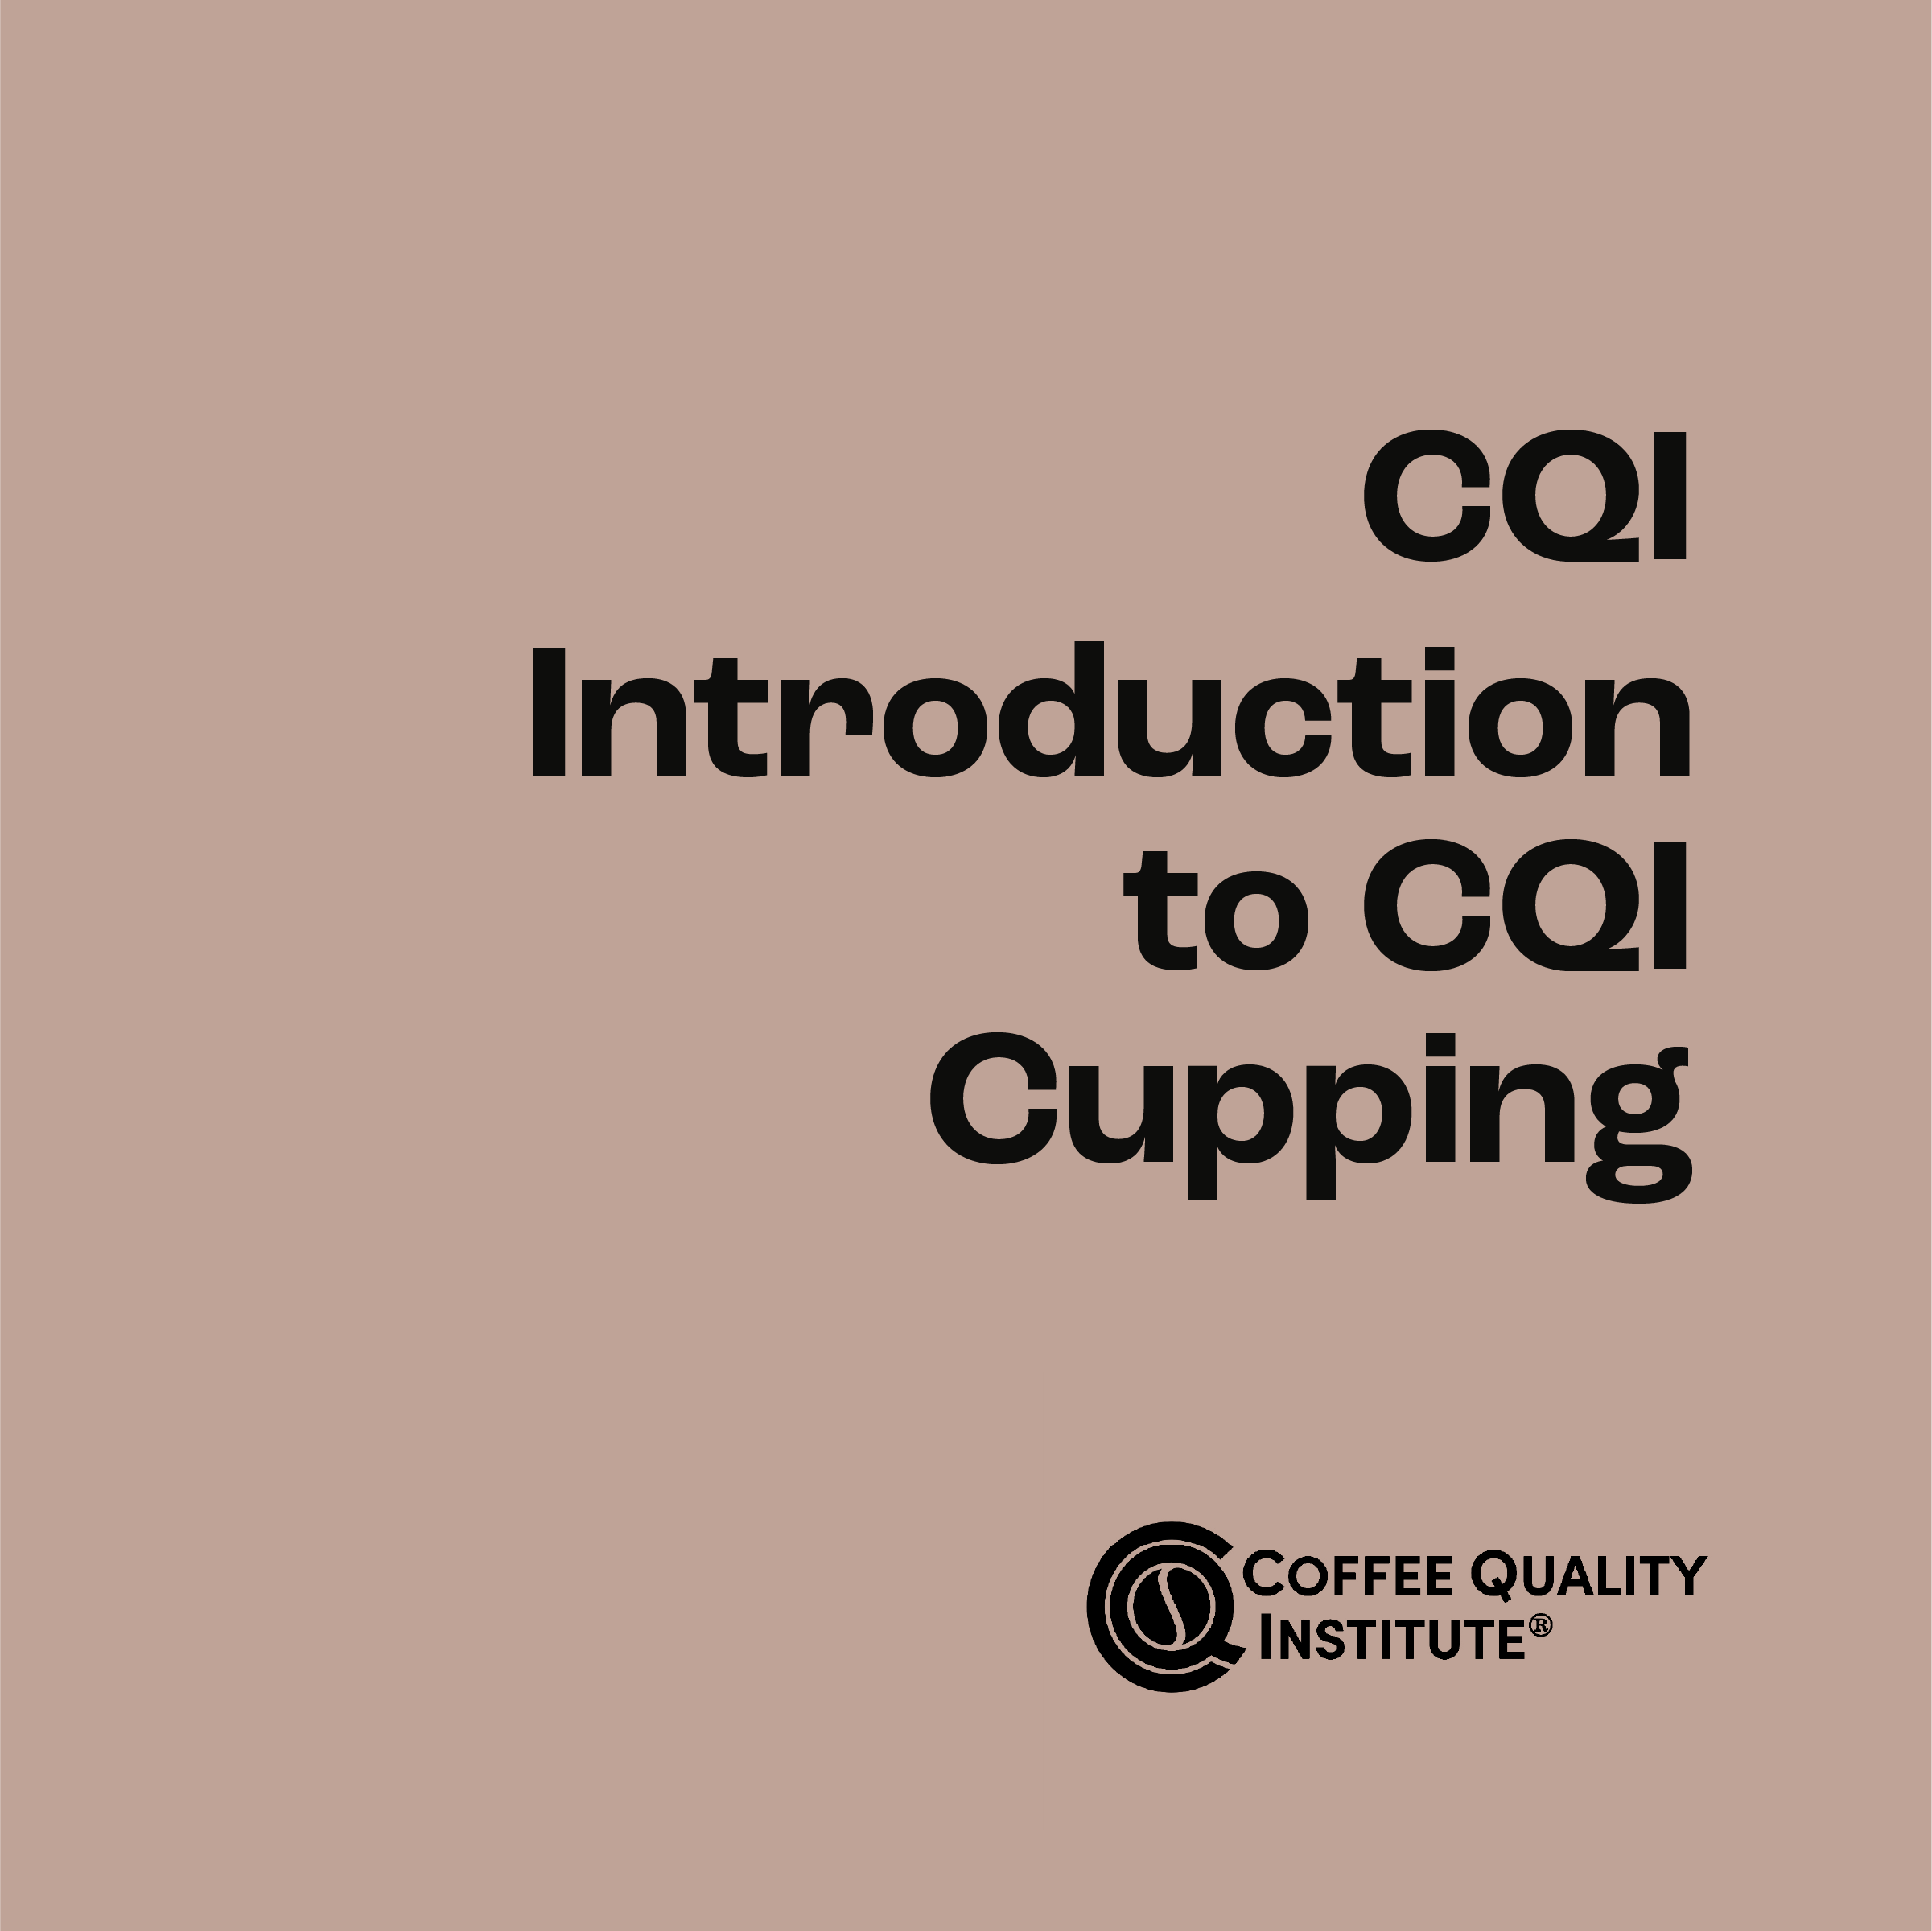 CQI: Introduction to CQI Cupping